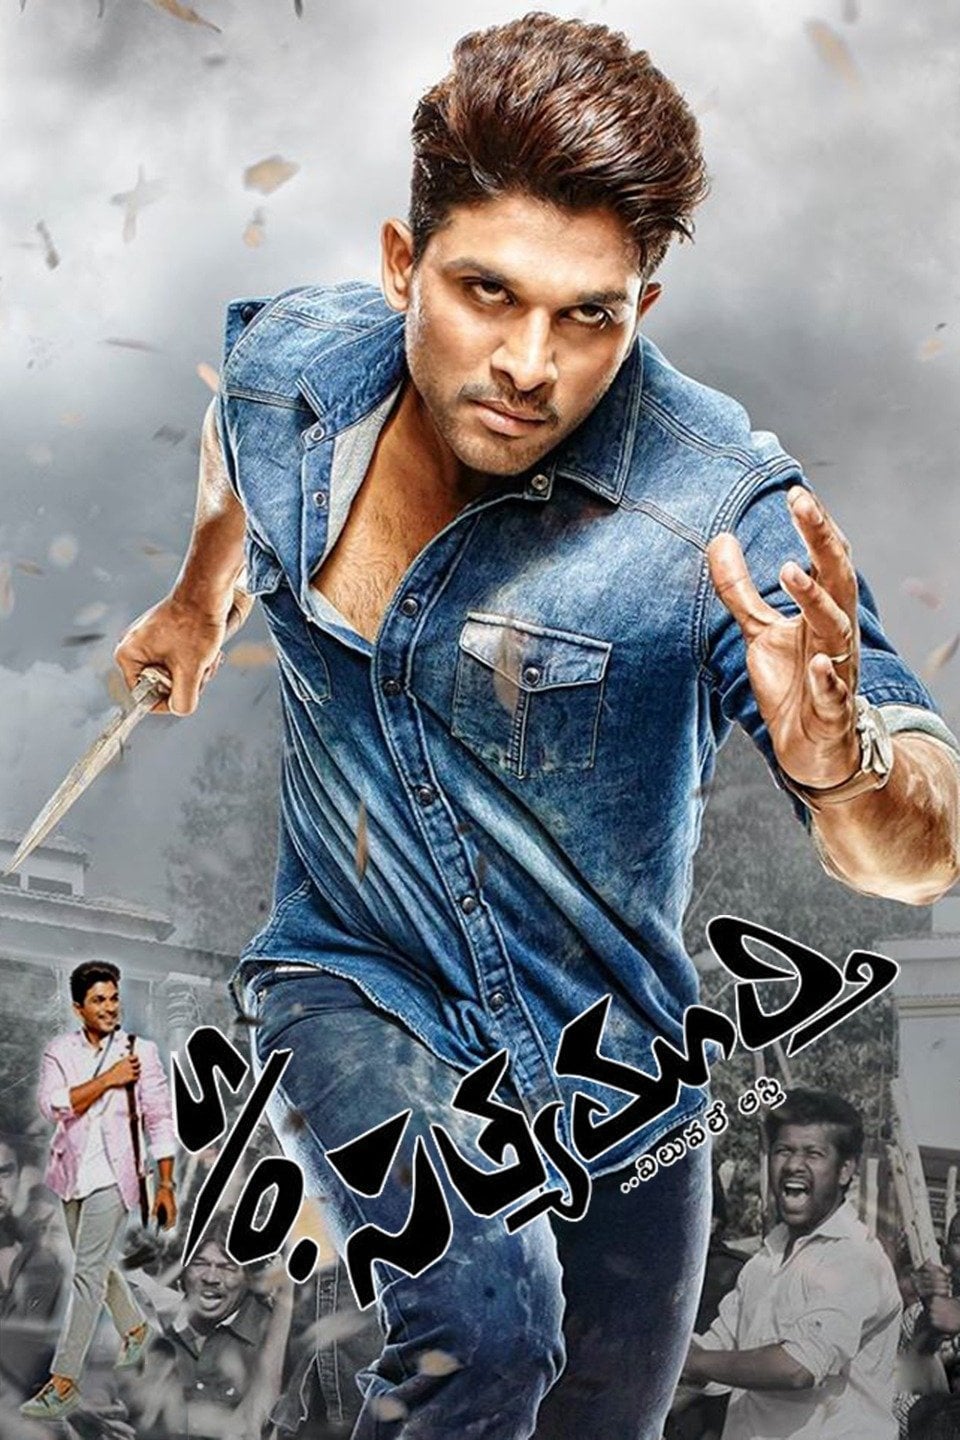 Poster for the movie "Son of Satyamurthy"